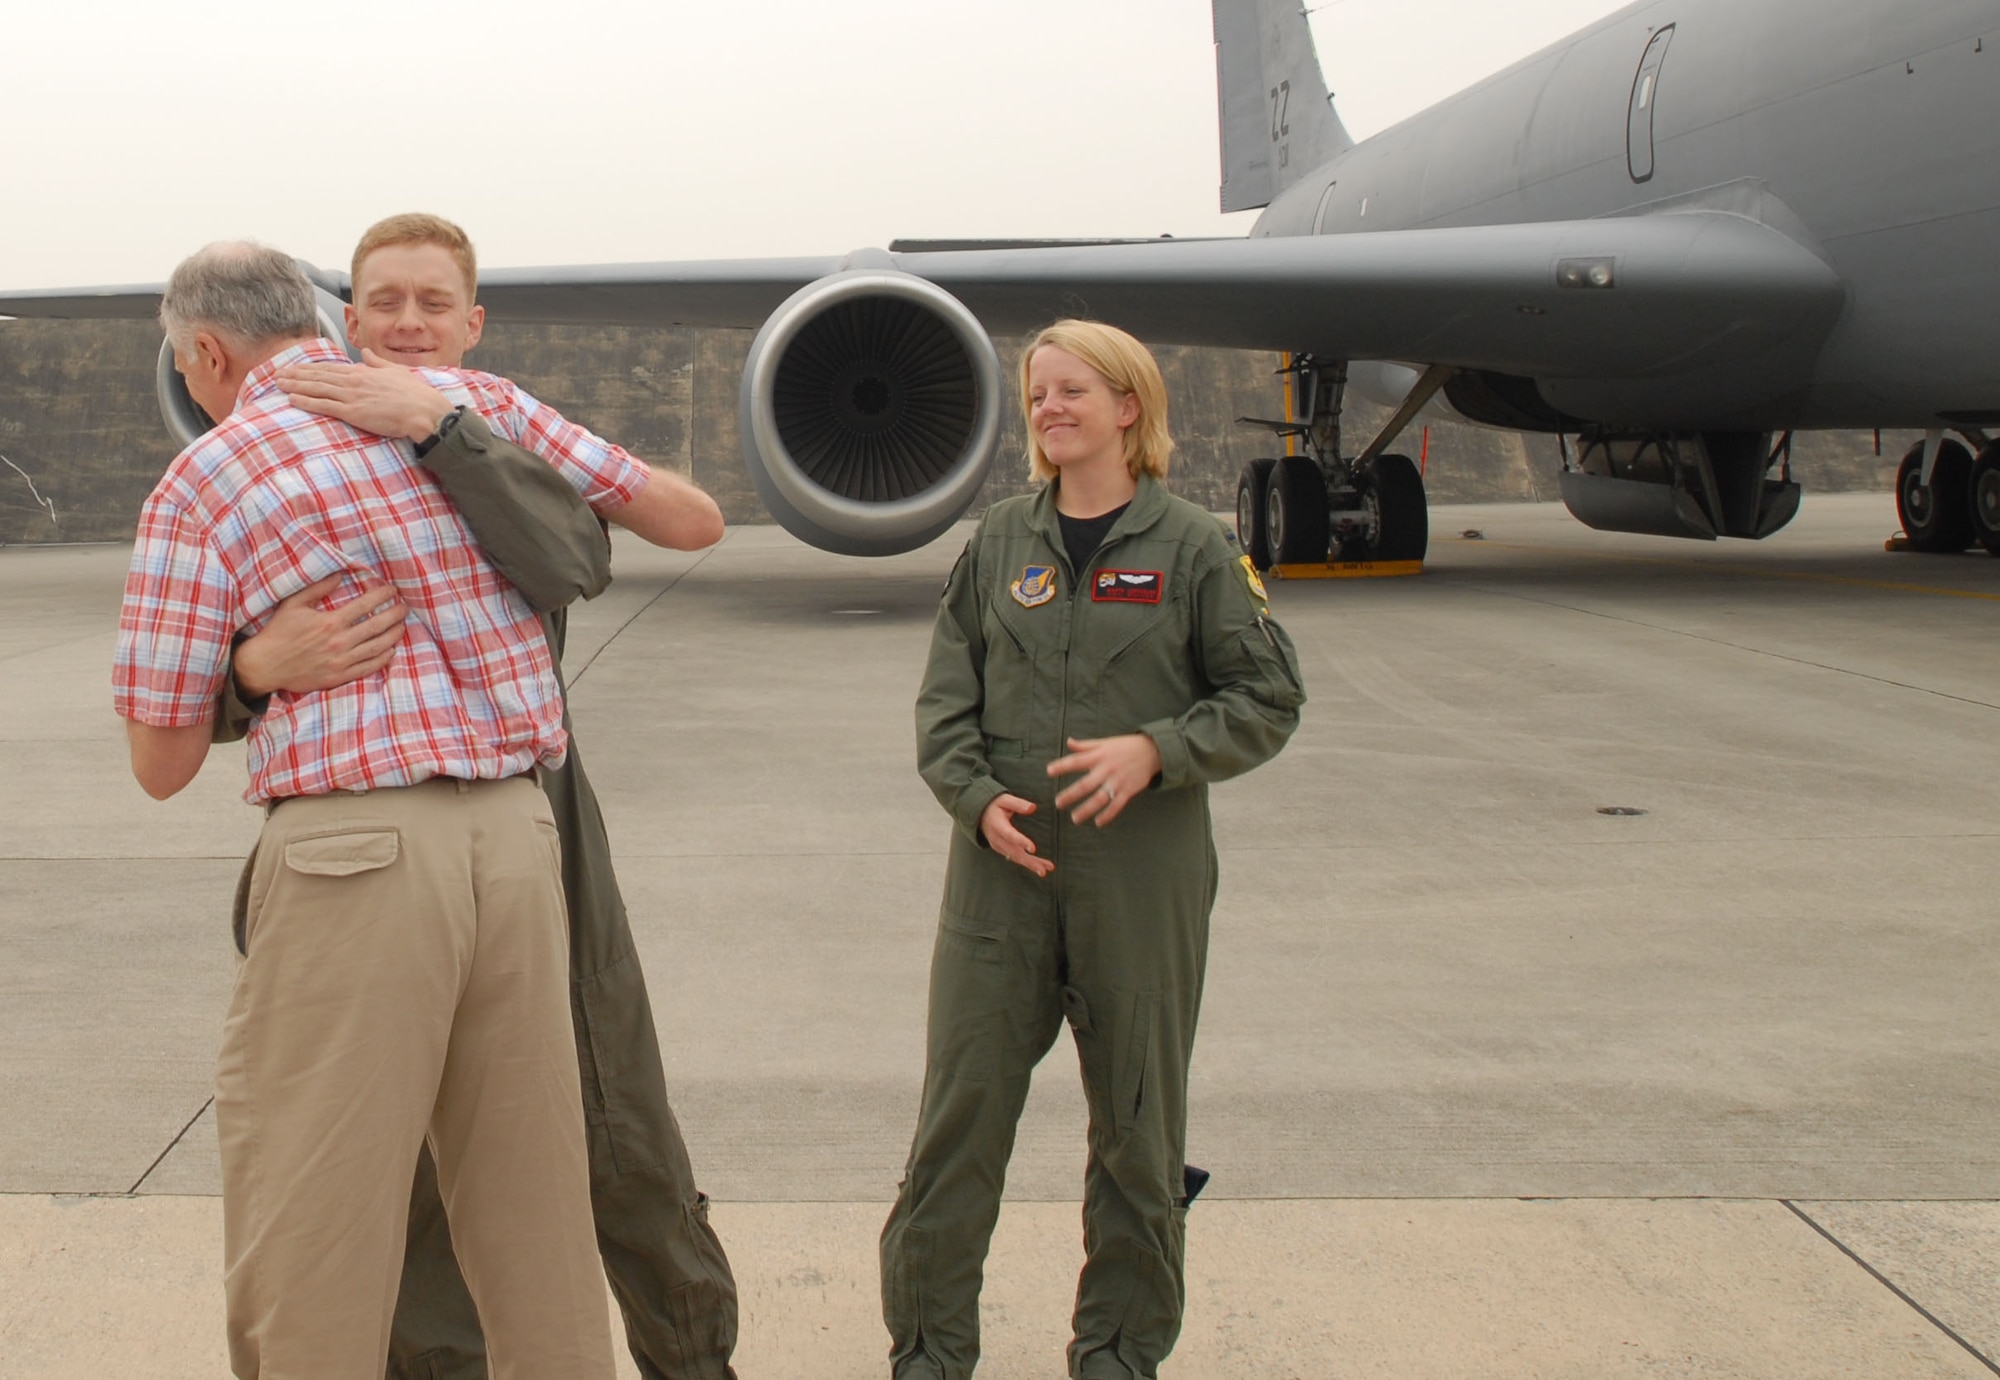 Jim Brierly hugs Capt. Dan Bradford as 1st Lt. Marta Lofthouse looks on at Kadena Air Base, Japan, on May 2, 2007.  Captain Bradford and Lieutenant Lofthouse were the pilots who flew the KC-135 that medically evacuated Mr. Brierly to Hawaii after he suffered a major heart attack.  Mr. Brierly and his wife, Marite, visited the units to thank them for their efforts.  Mr. Brierly teaches English as a second language at Kadena Elementary School.  Both officers are with the 909th Air Refueling Squadron. (U.S. Air Force photo by Airman 1st Class Kasey Zickmund)